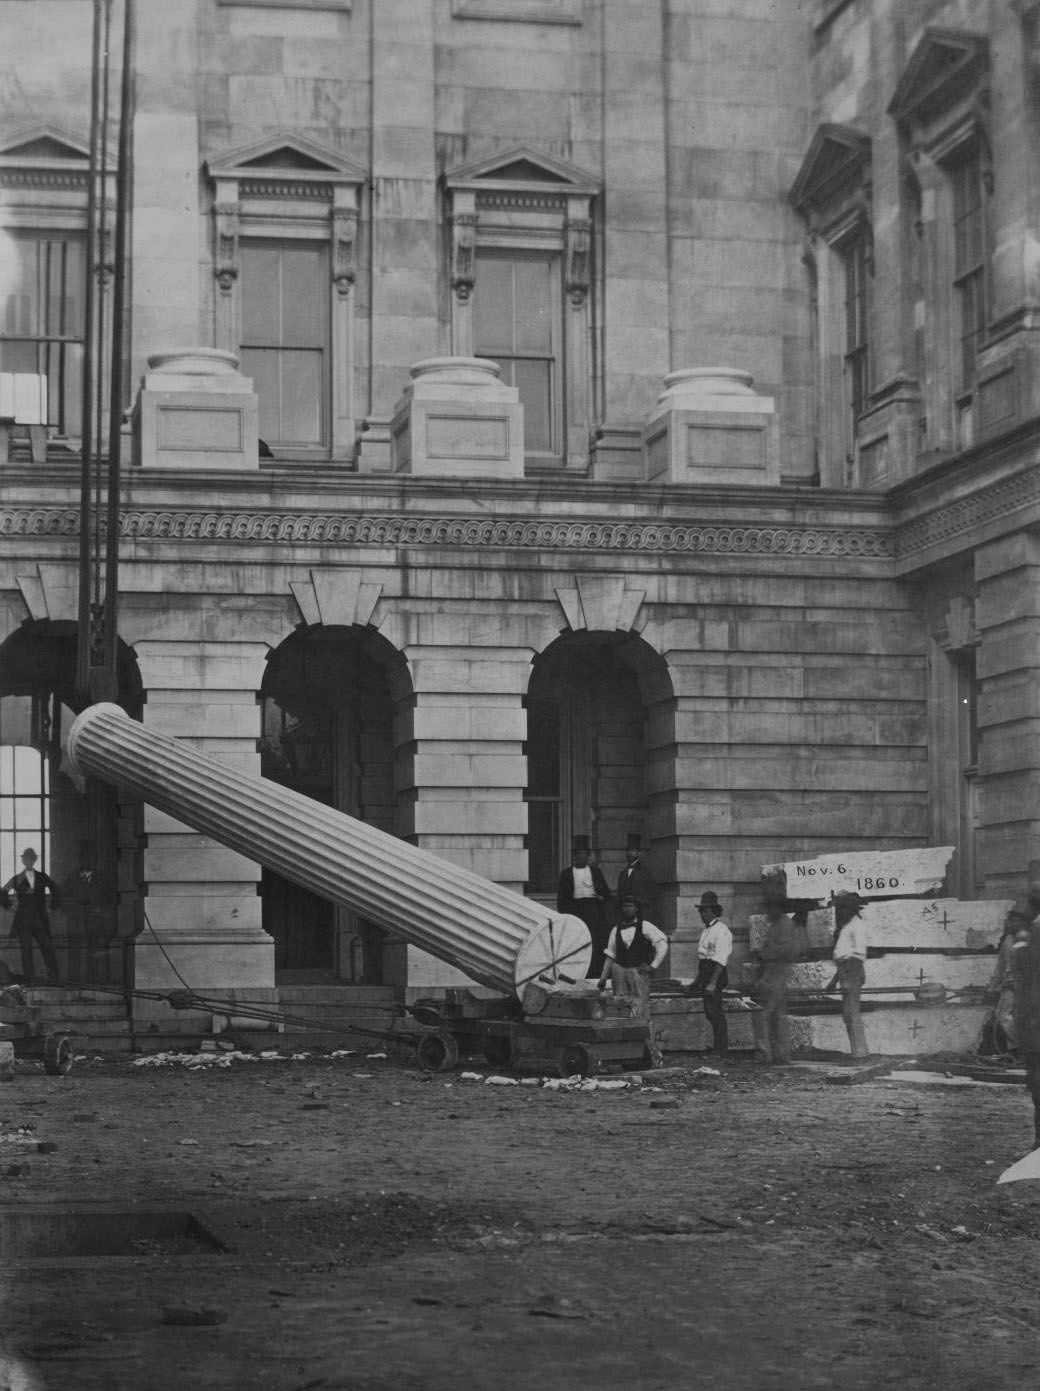 The ‘Lincoln column,’ first monolith raised, Nov. 1860, Presidential election, being S. column of connecting corridor.